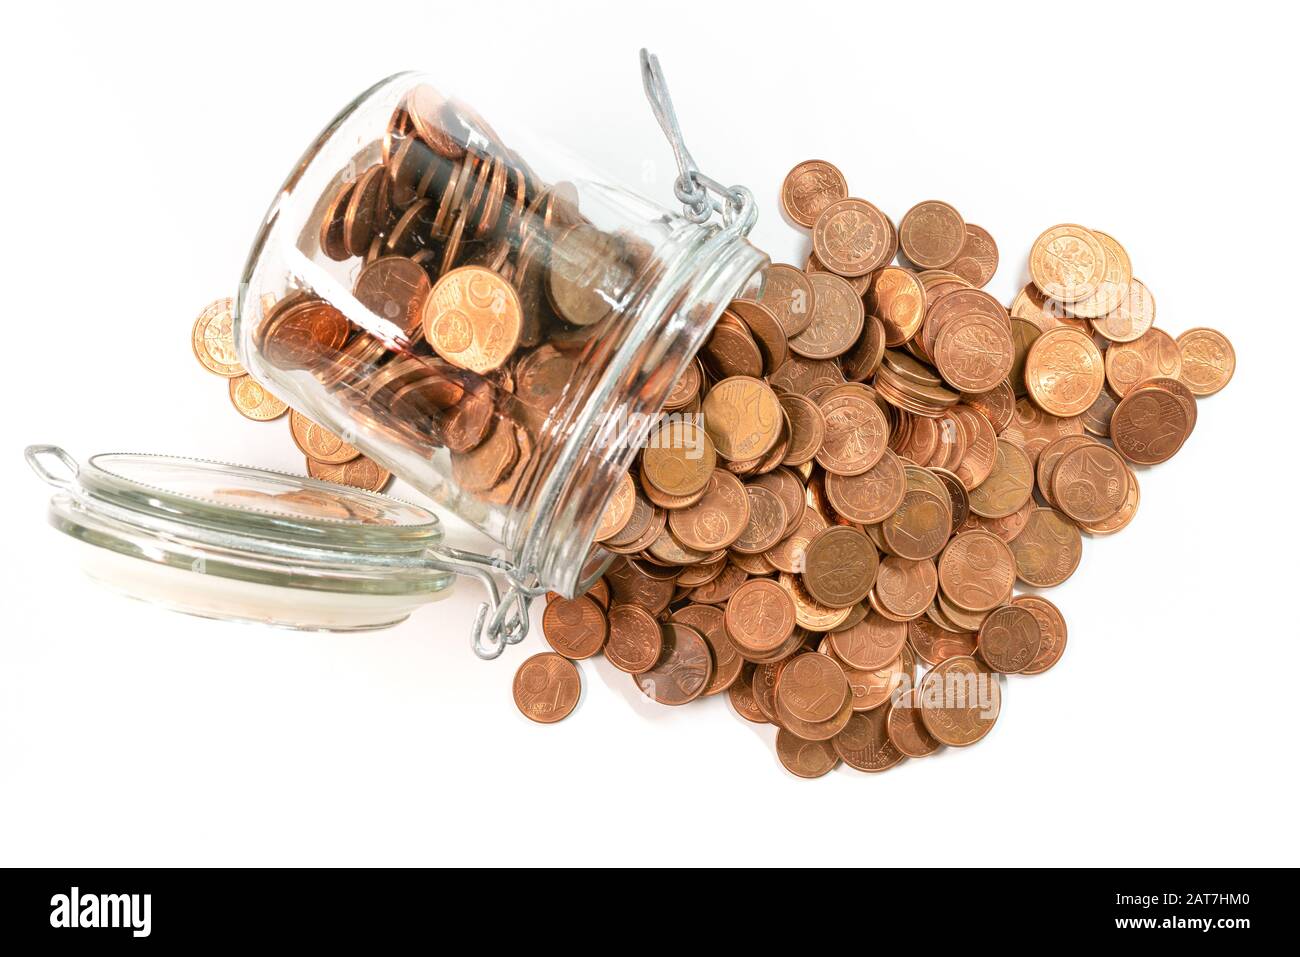 small change euro cent coins pouring out of glass jar isolated on white background, withdrawal of low denomination coins concept. Stock Photo